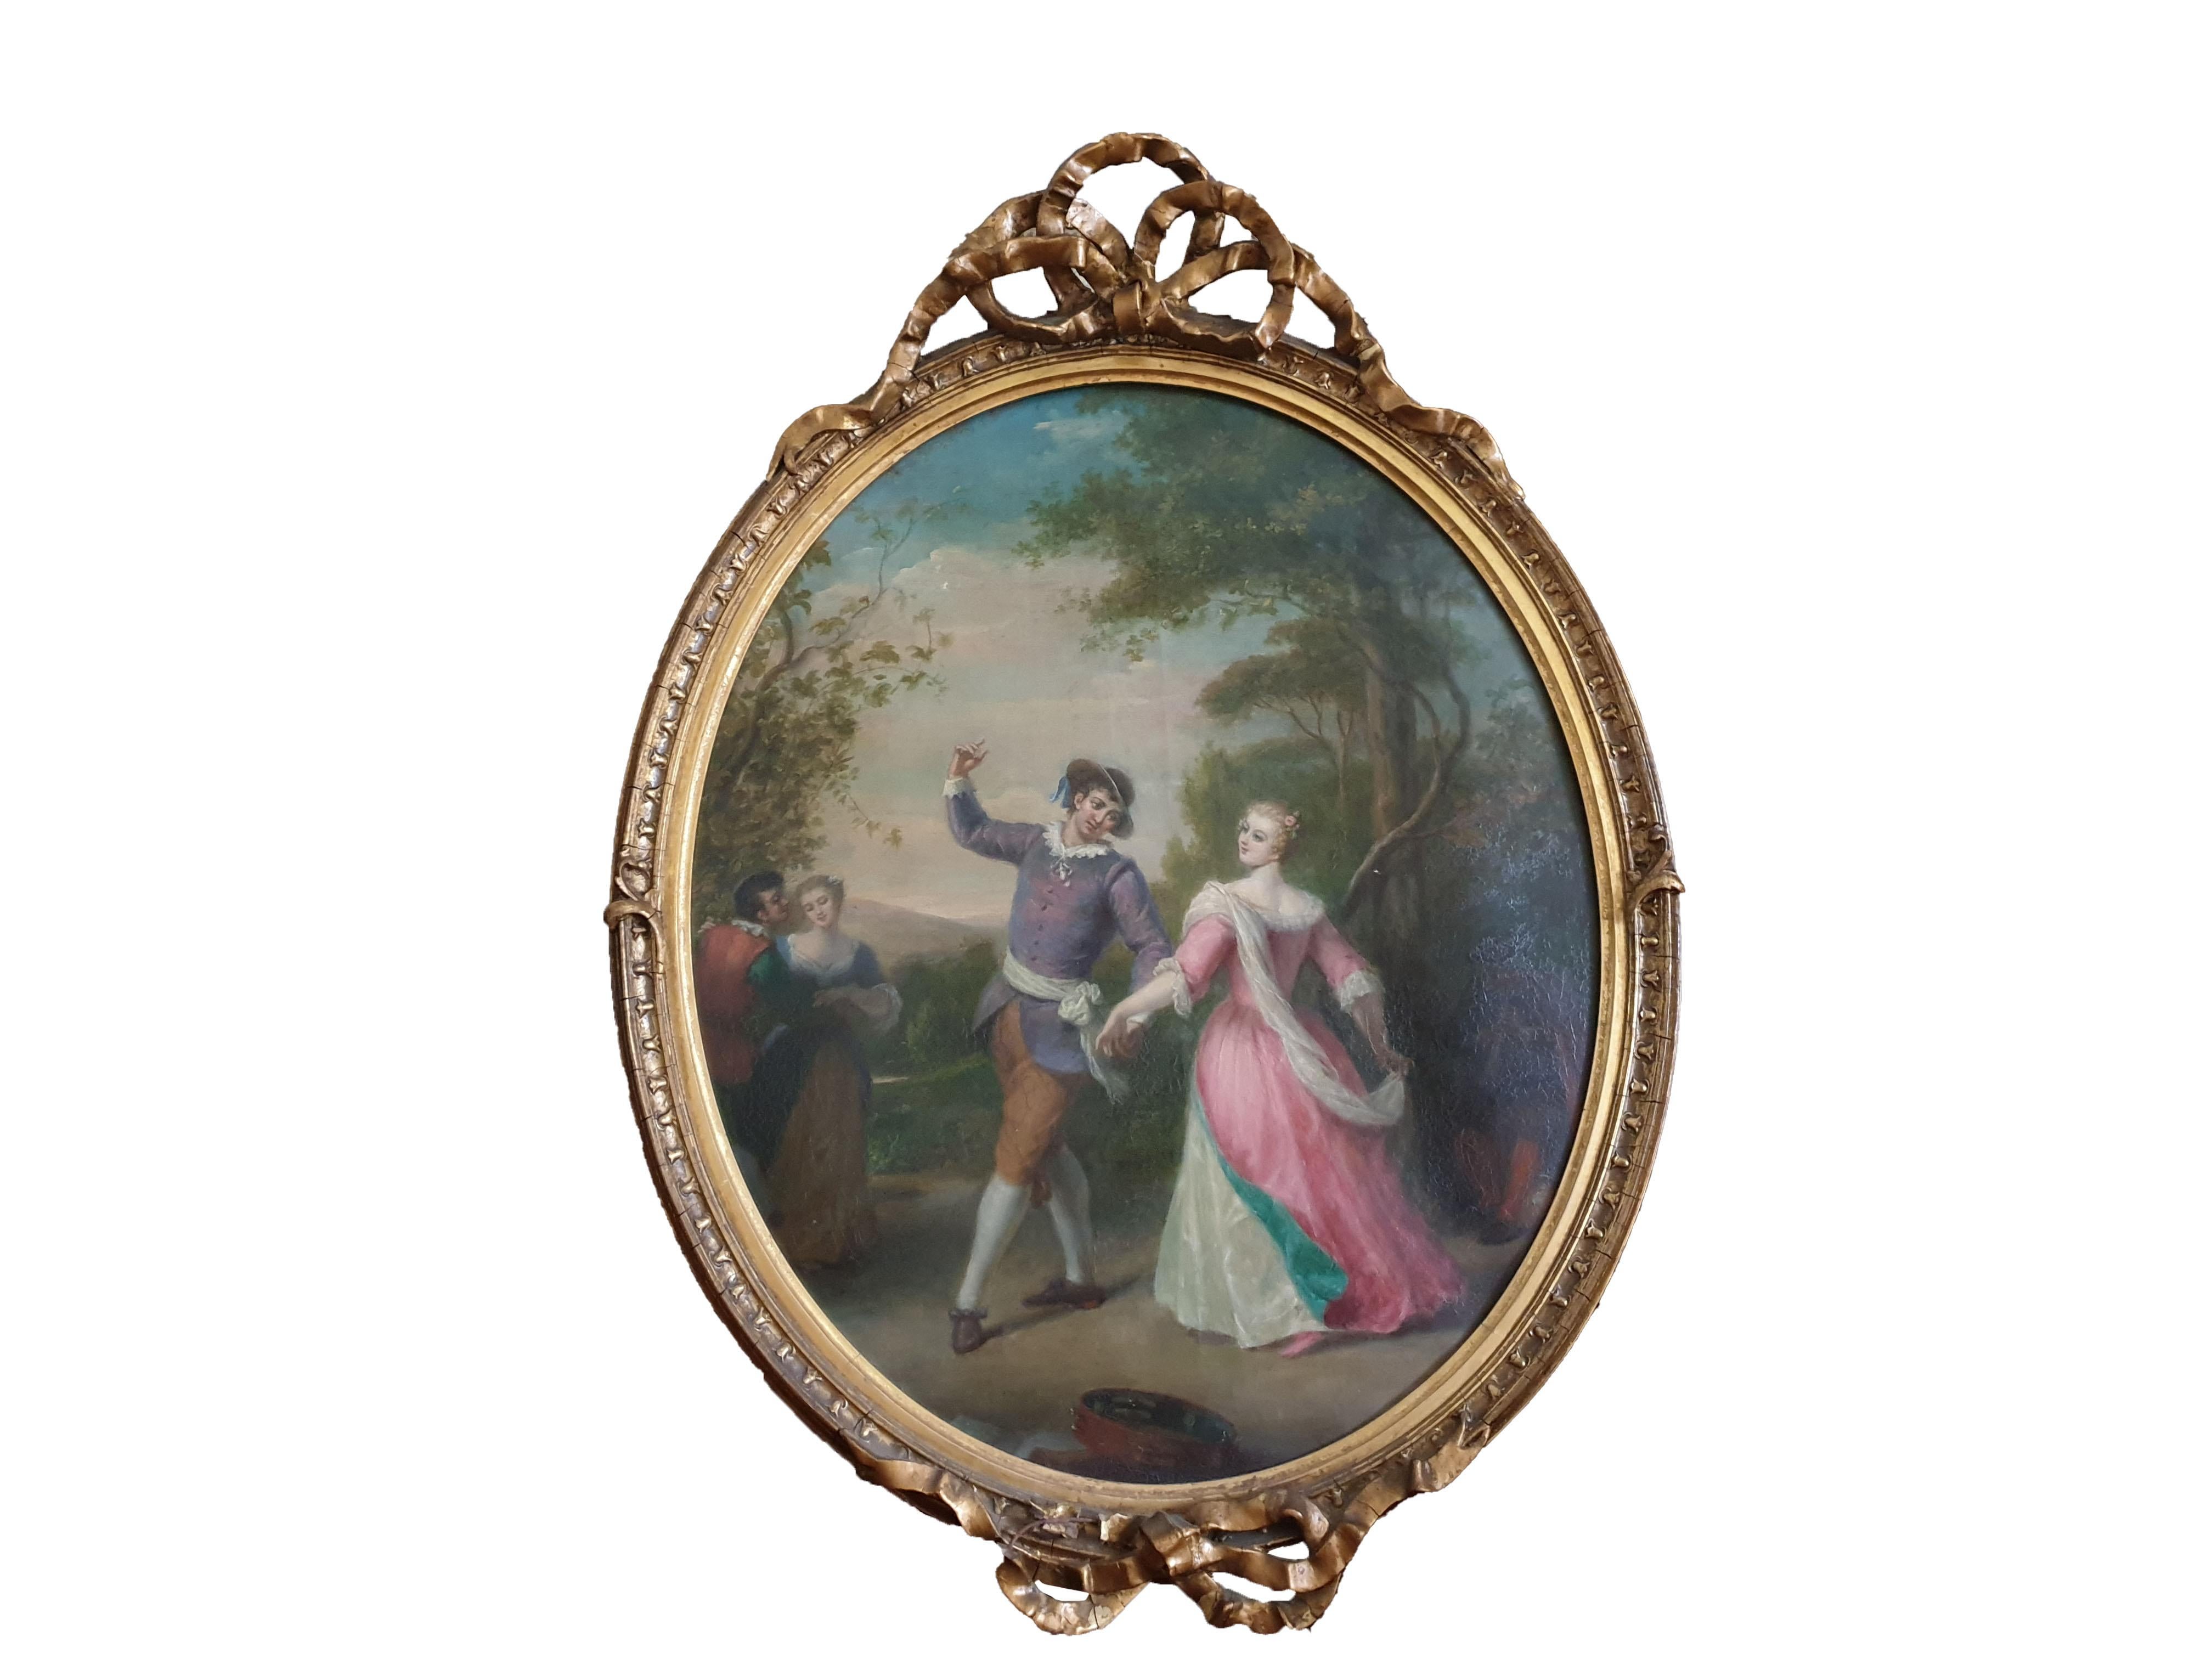 An extremely impressive pair of oval shaped wall paintings from a Promenint British mansion, with provenance labels on each piece and each signed. Ribonned tops and bottoms dates from 1910 on the label with immaculate frames and gilding, and an